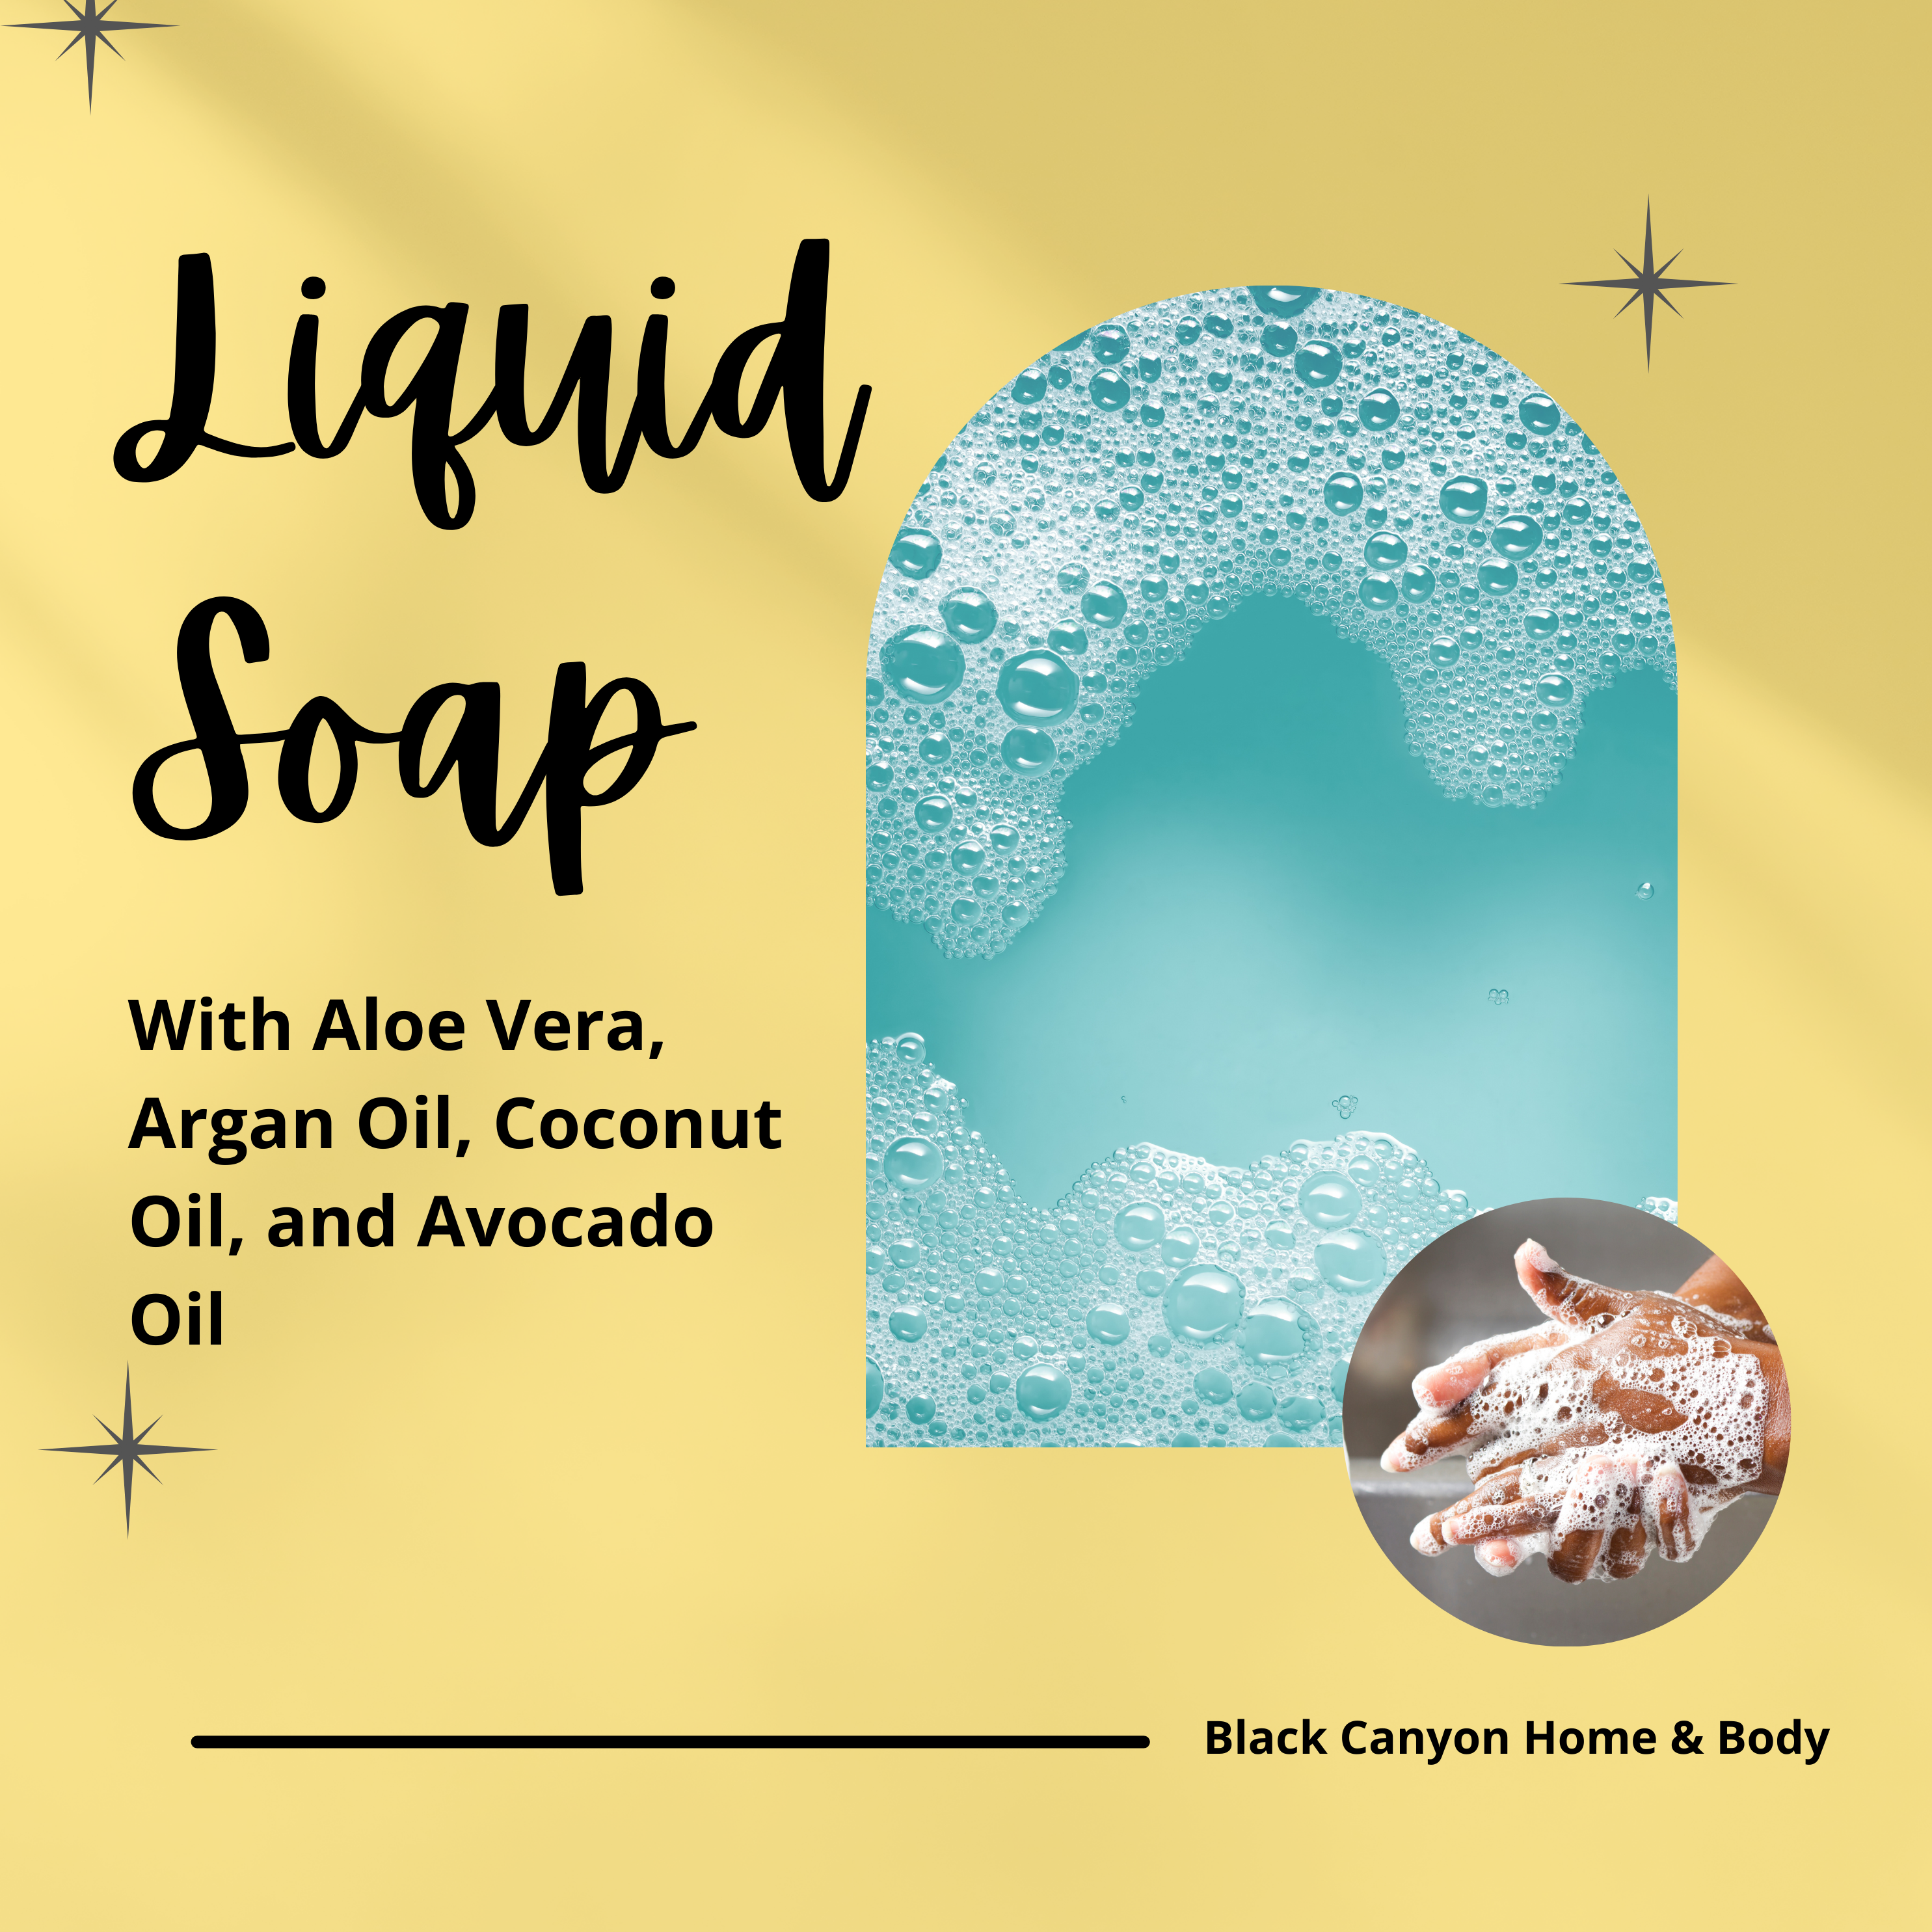 Black Canyon Honeysuckle & Lilac Scented Liquid Hand Soap